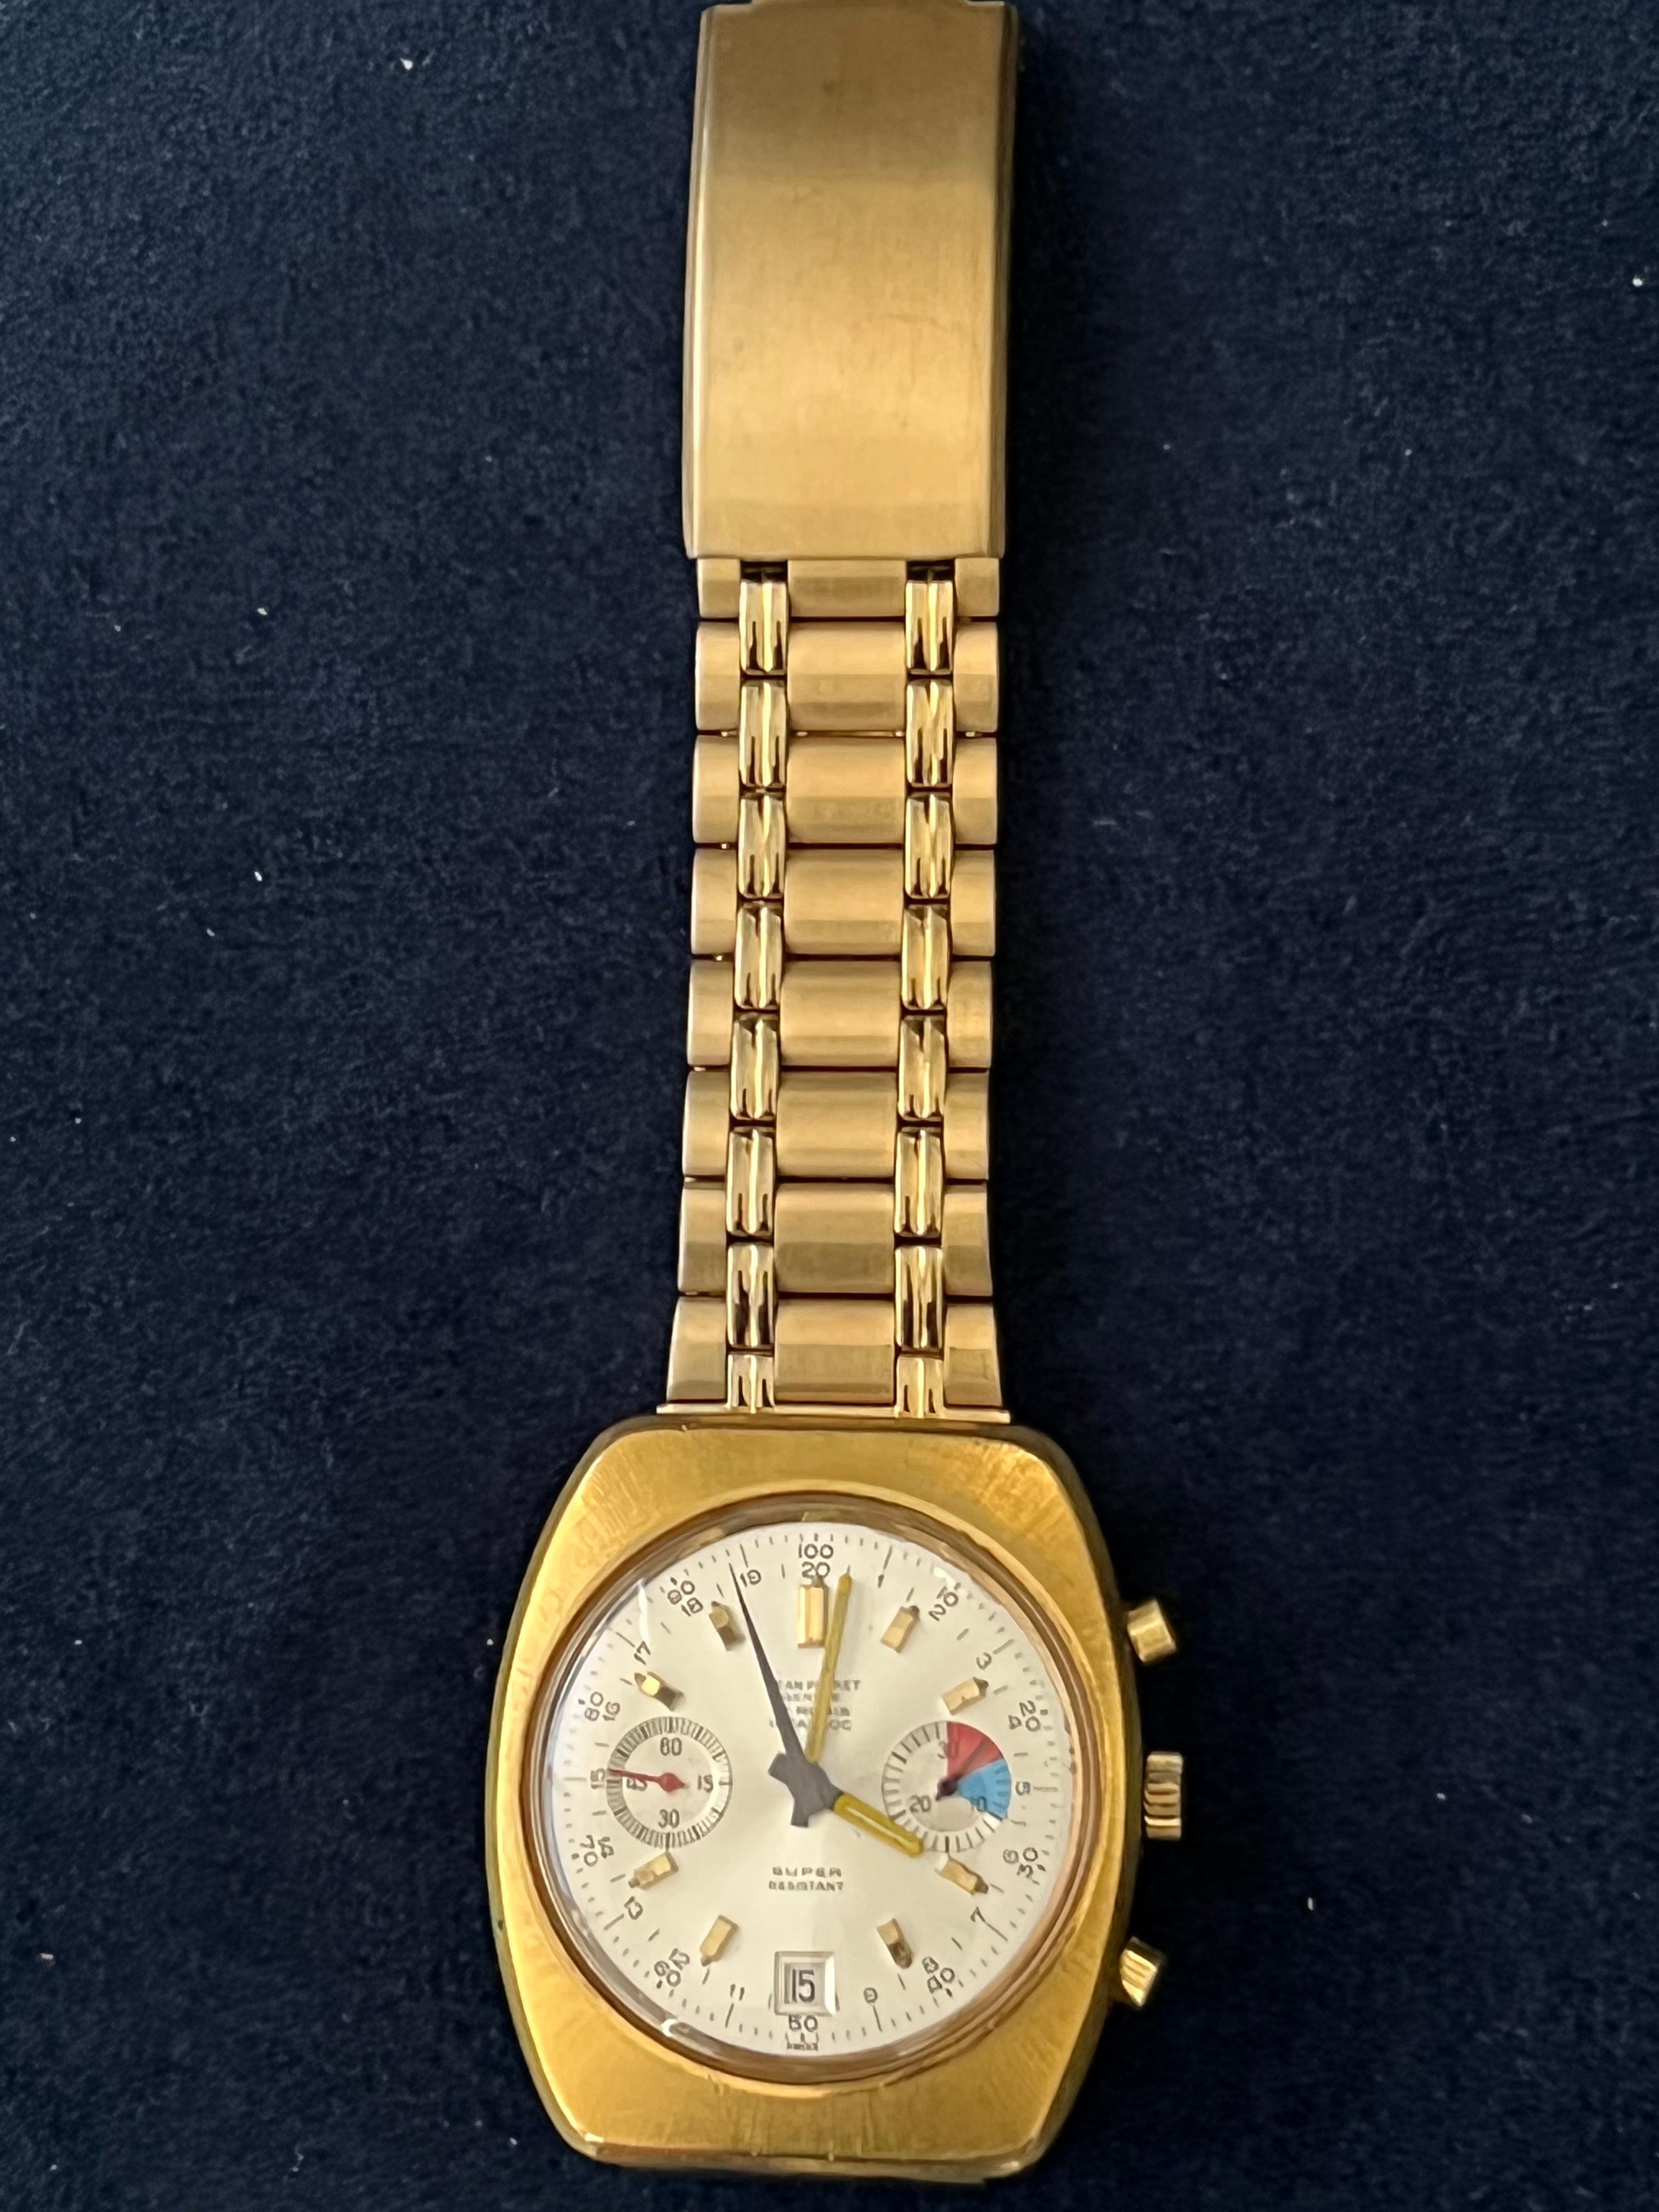 Rare Jean Perret Geneve  QJ 3826 Gold Plated & Stainless Steel Quartz Men's Watch in mint condition. First owner from a private collection. The mate finish gold bracelet and case are just to die for.
17 Rubies 
Sport 
Stopper 
Super Resistant 
Water